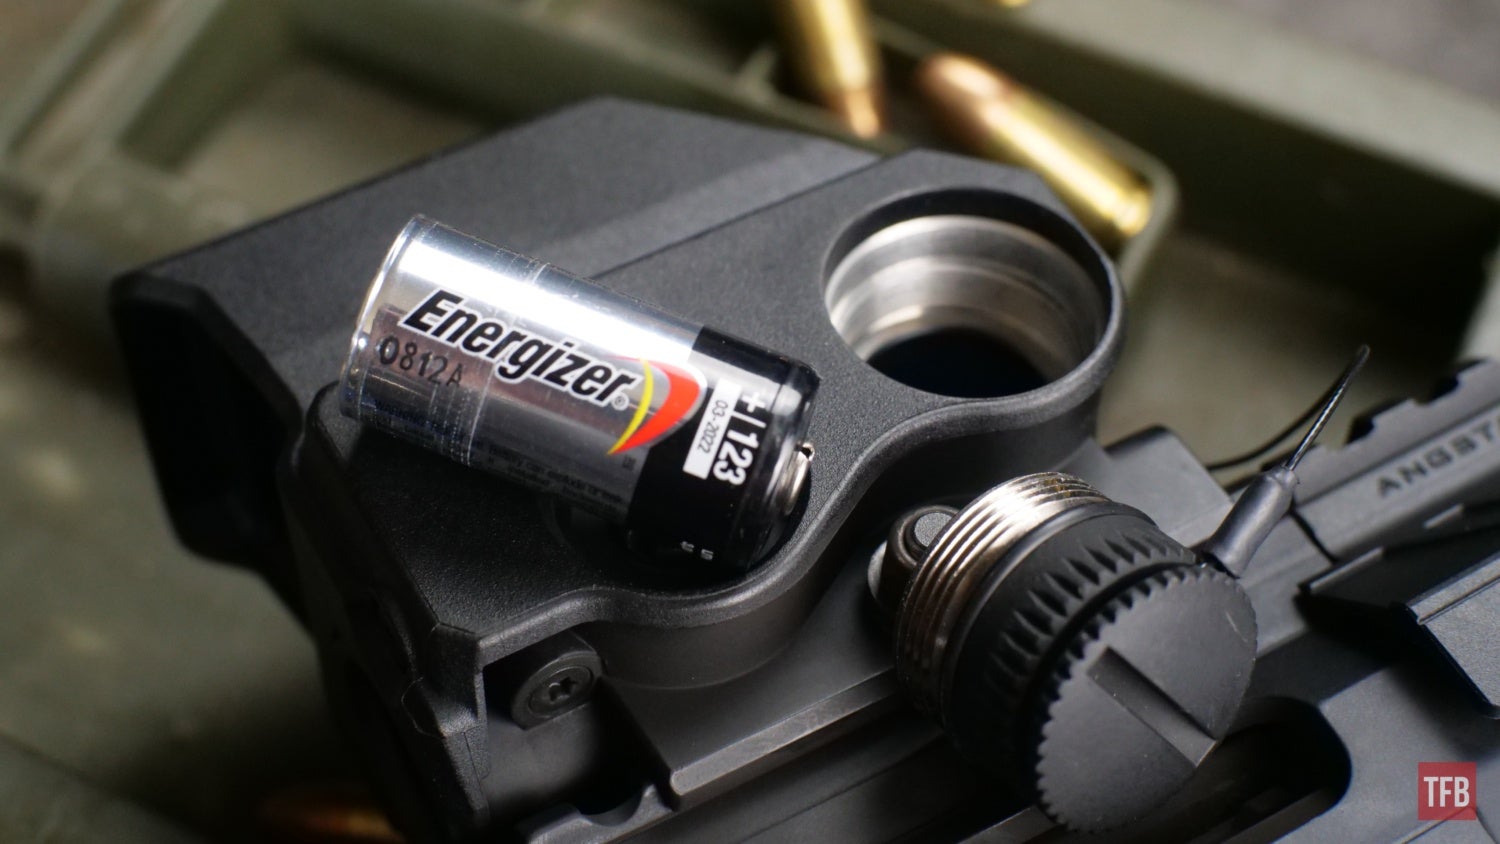 TFB REVIEW: The Meprolight TRU-VISION Red Dot Sight